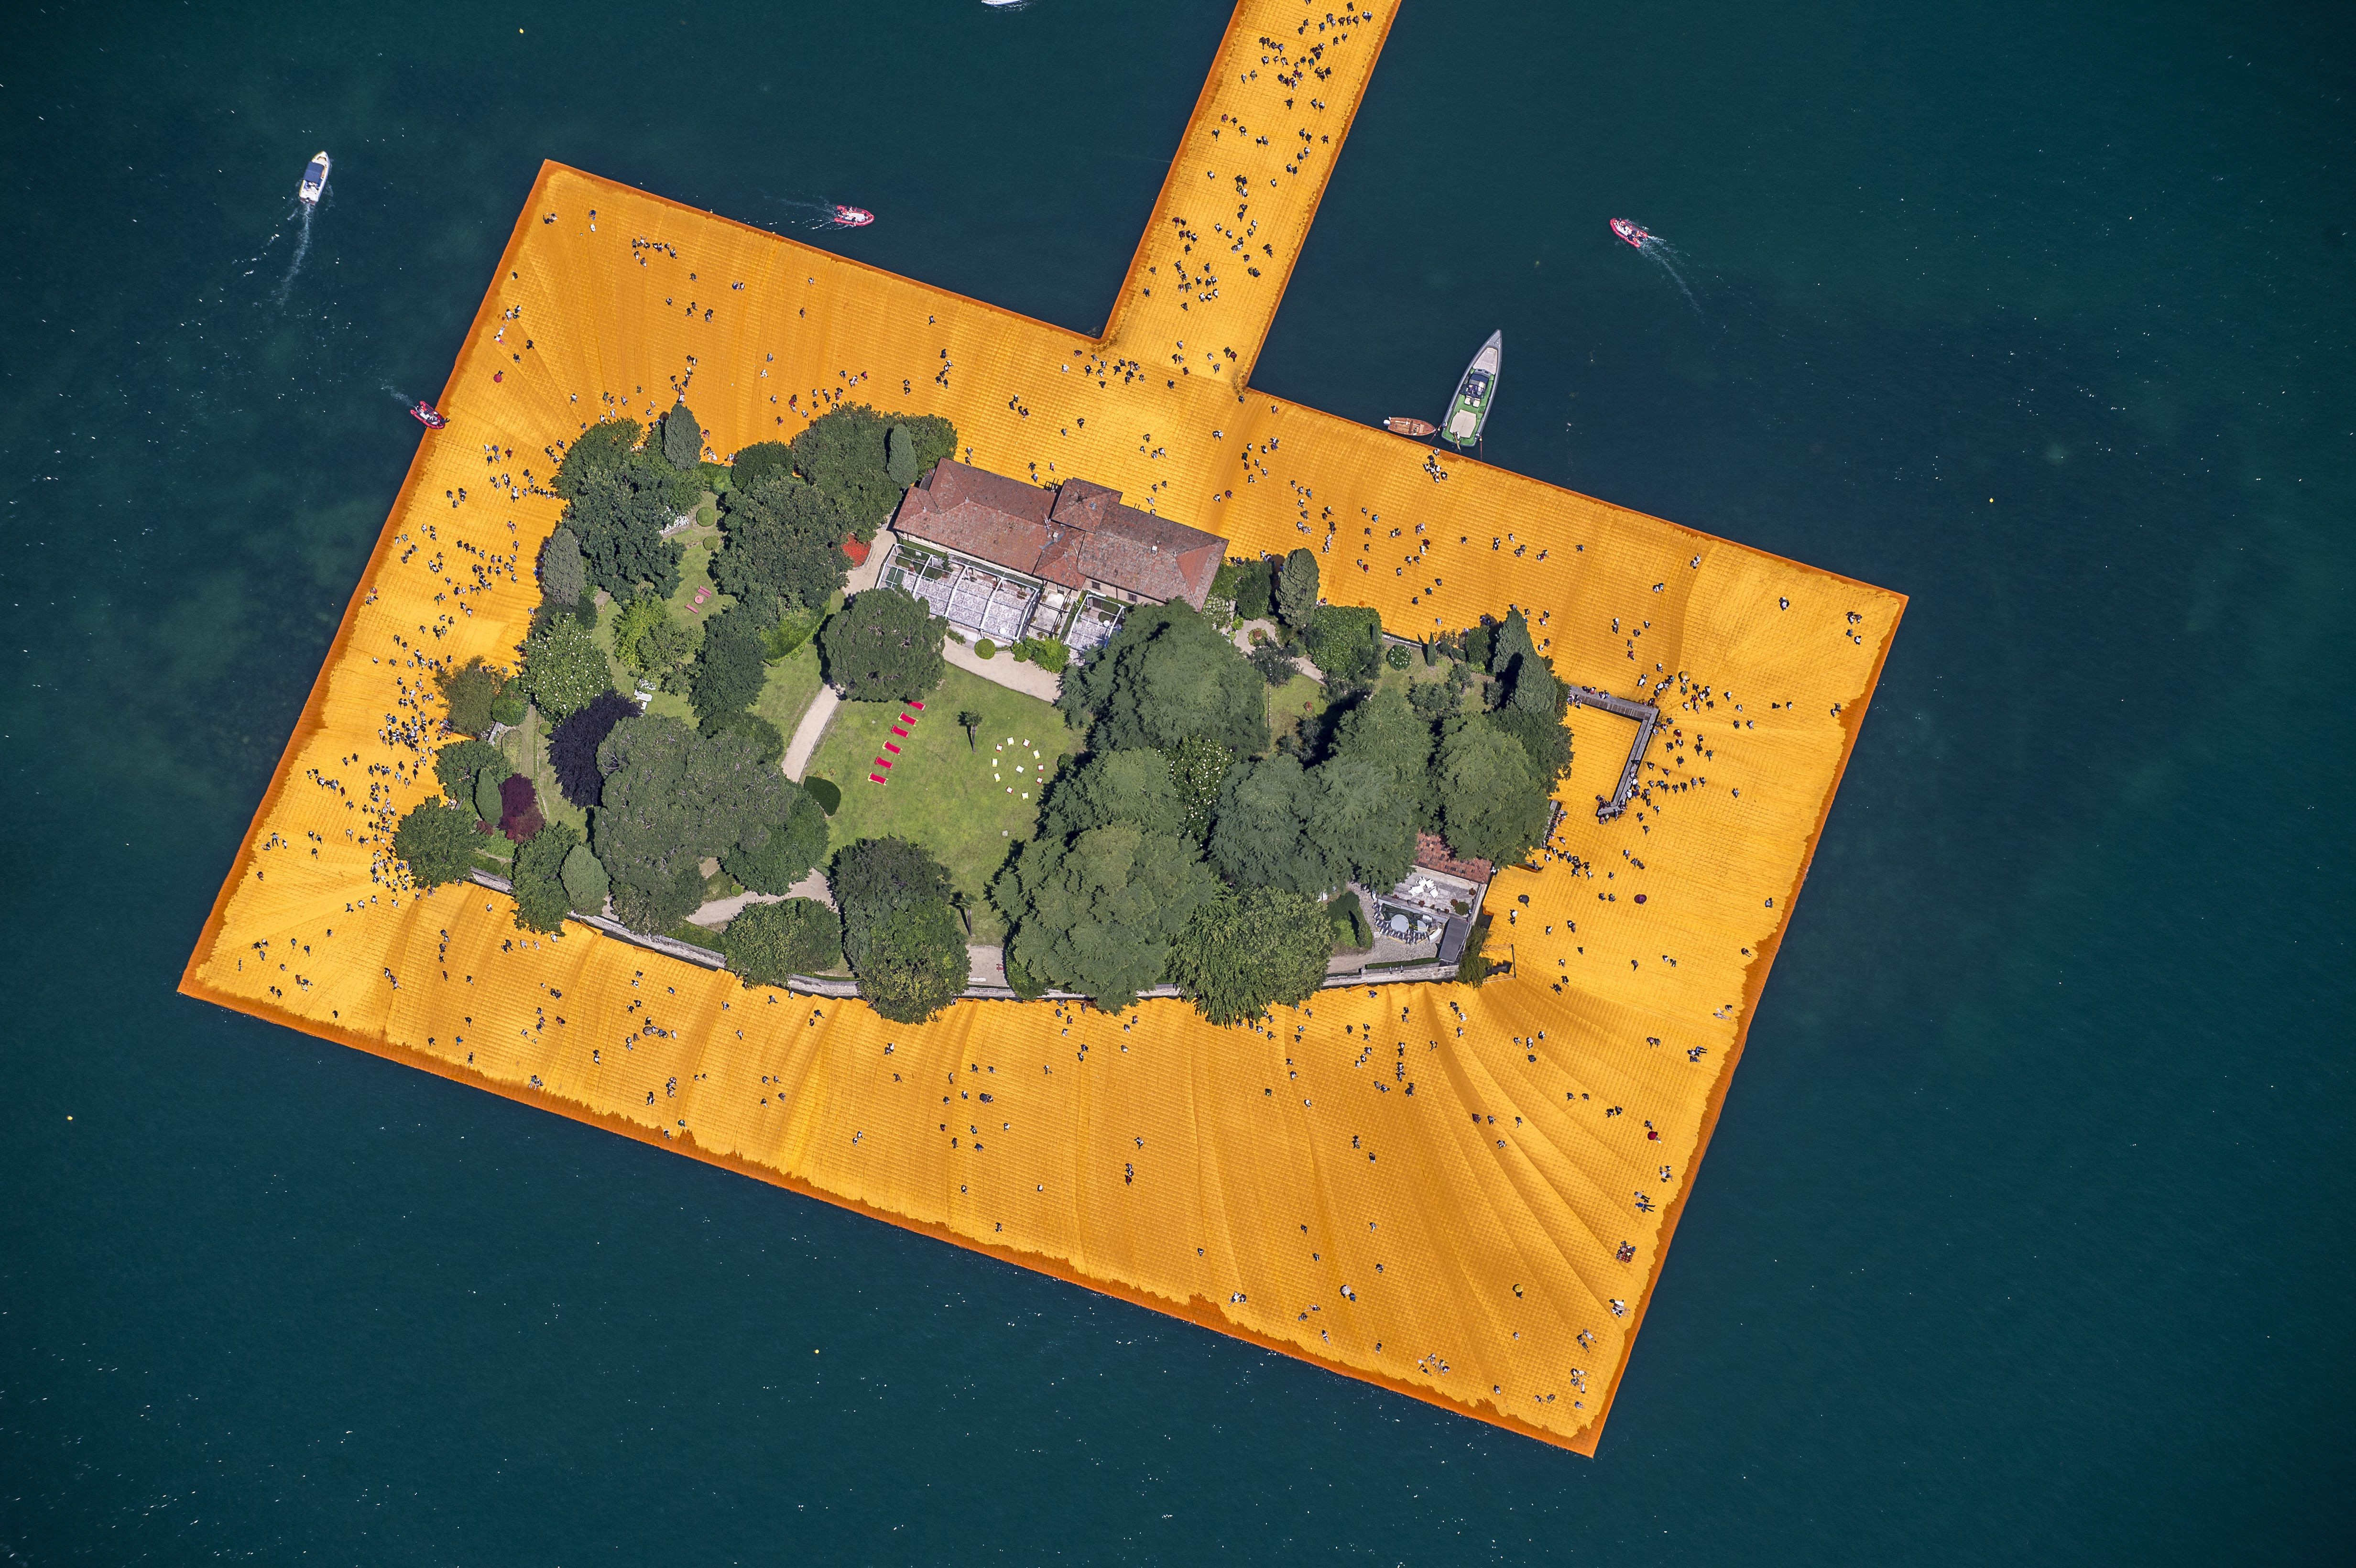 SULZANO, ITALY - JUNE 28: Aerial view of the installation "The Floating Piers" by artist Christo Vladimirov Yavachev. The work connects the village of Sulzano to the small island of Monte Isola and another very small island (São Paulo Island) on June 28,  (Foto: Getty Images)